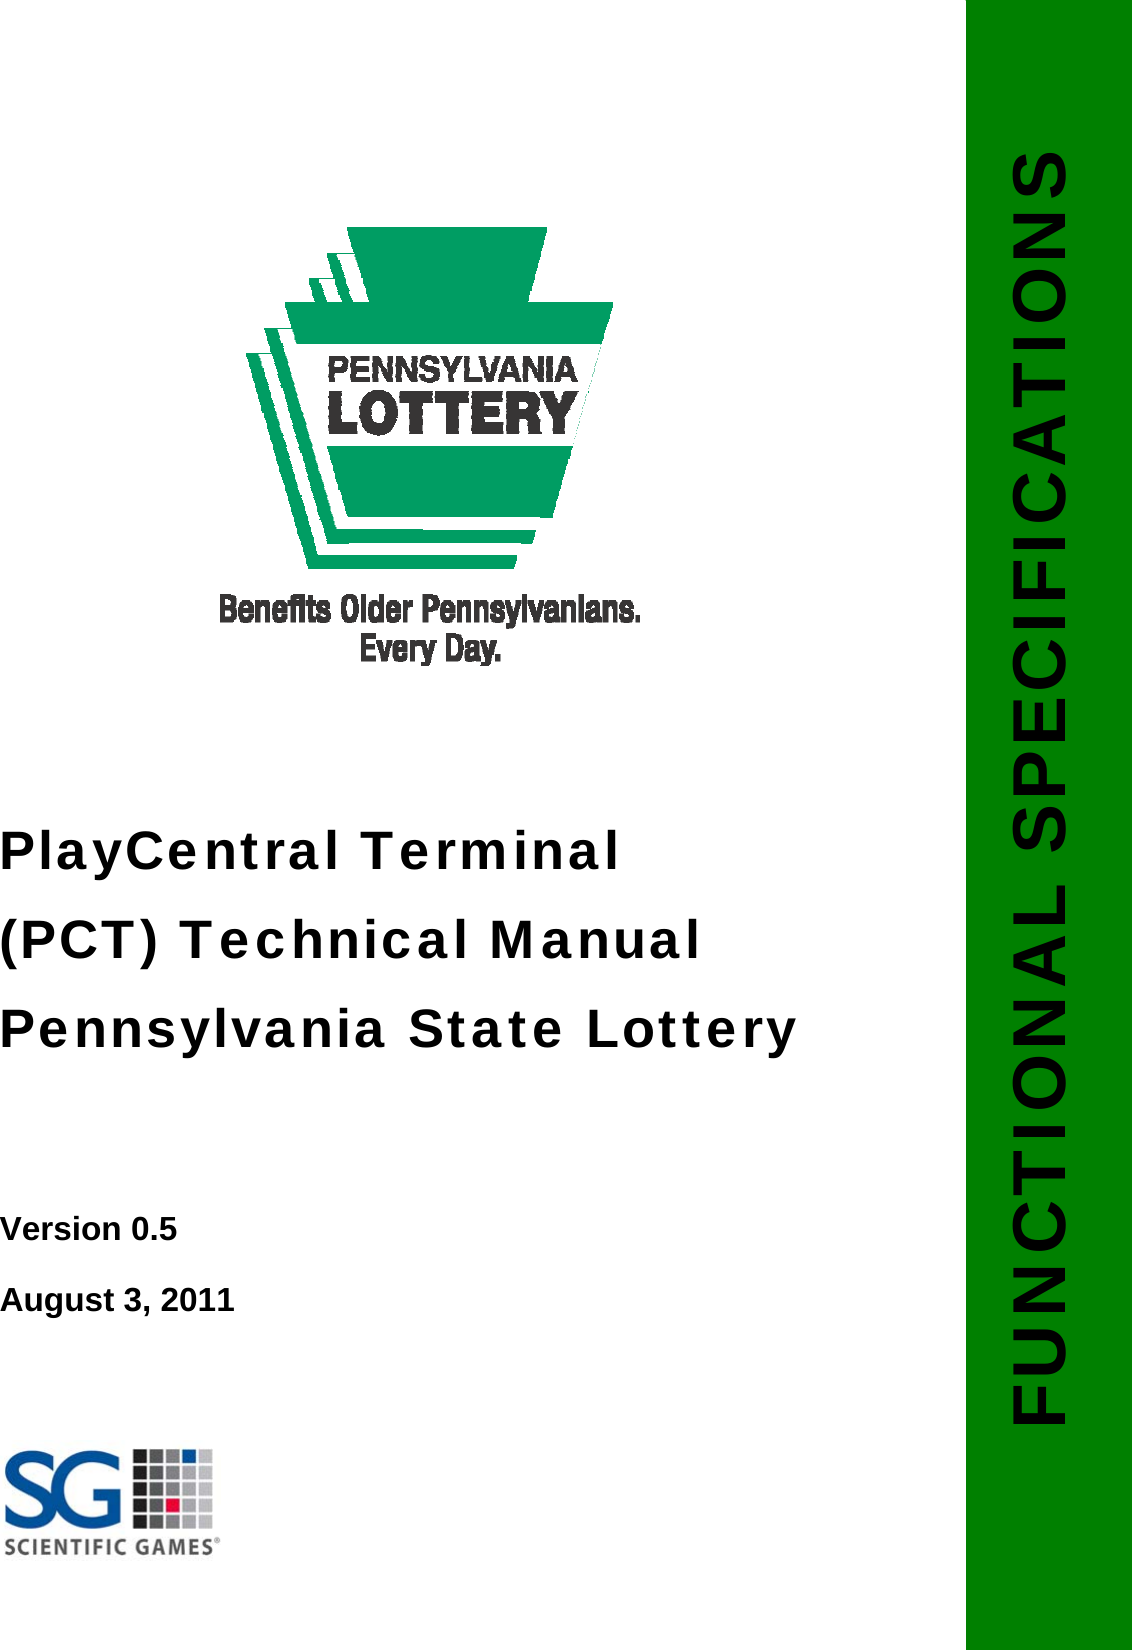                  PlayCentral Terminal (PCT) Technical Manual Pennsylvania State Lottery   Version 0.5 August 3, 2011   FUNCTIONAL SPECIFICATIONS 